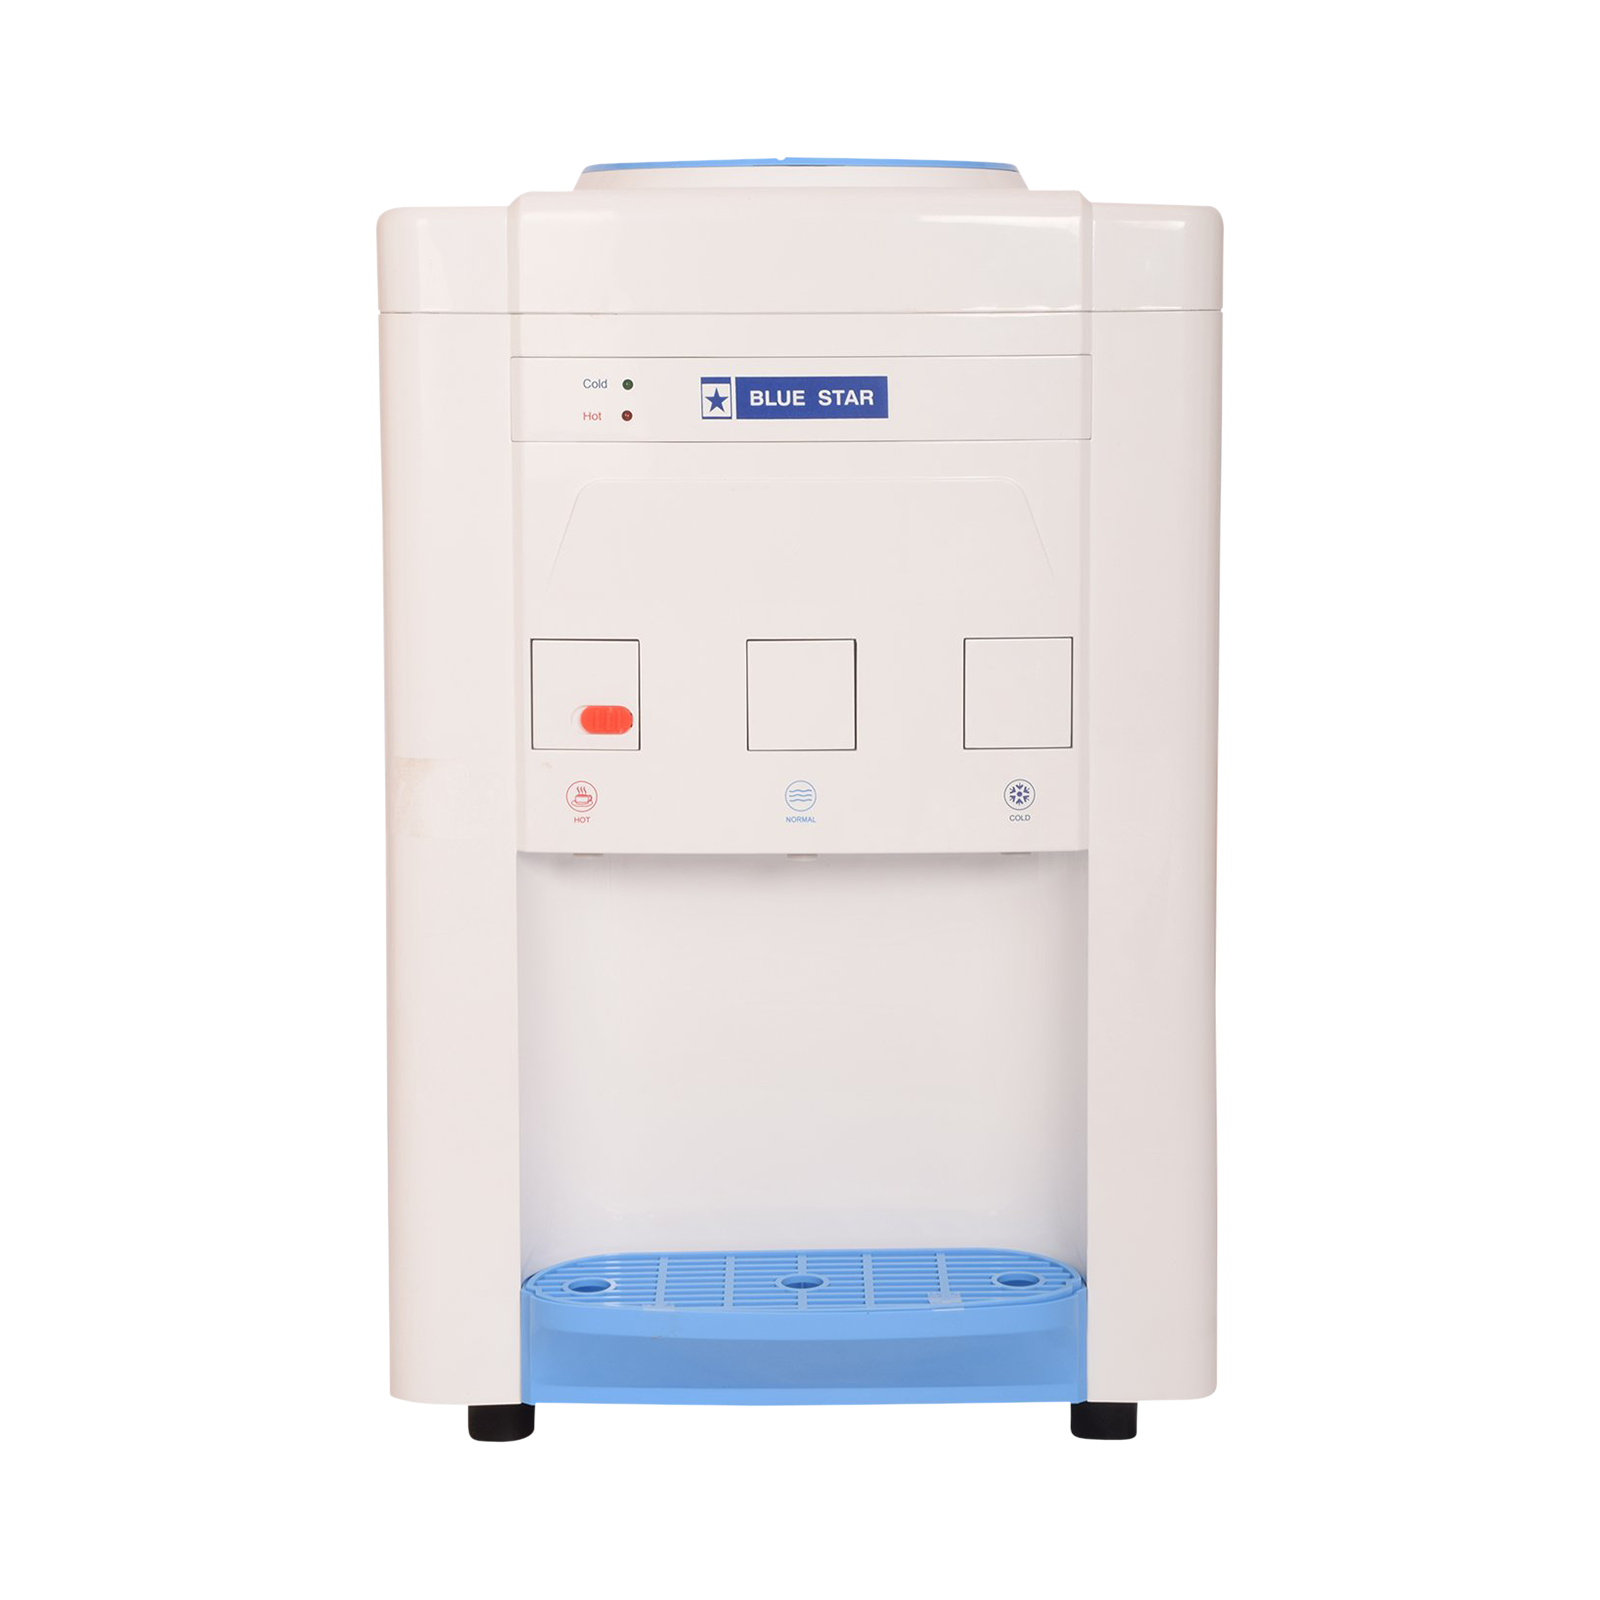 Blue Star Hot, Cold and Normal Top Load Water Dispenser with 3 Taps (White)